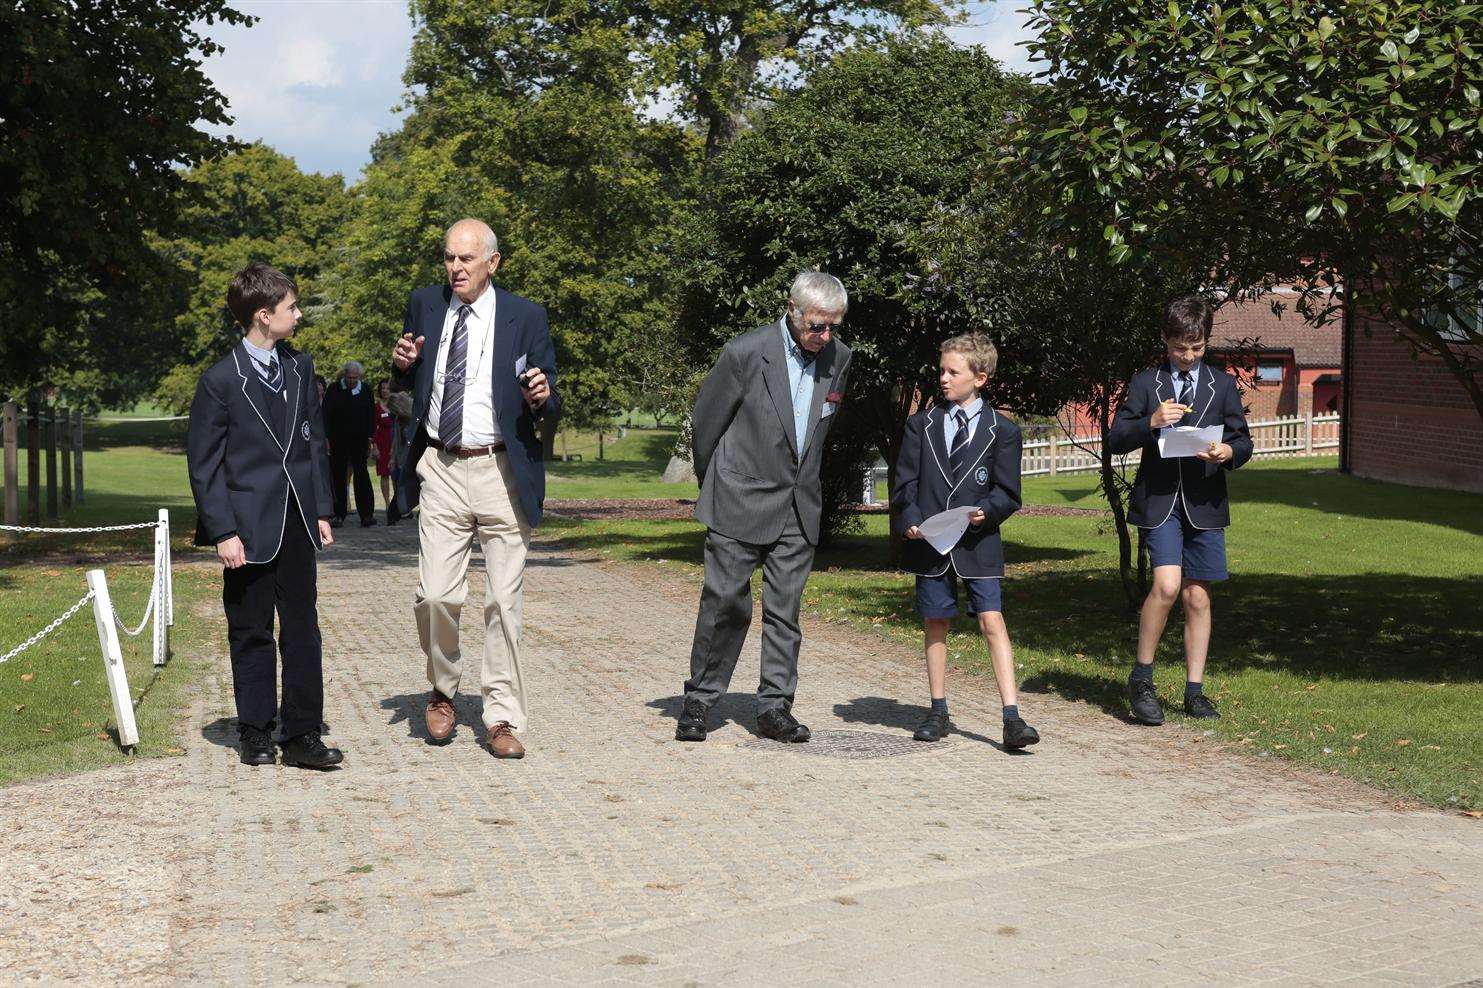 From left, Bruce Cripps and Dr Alexander Robinson get shown around by some current pupils